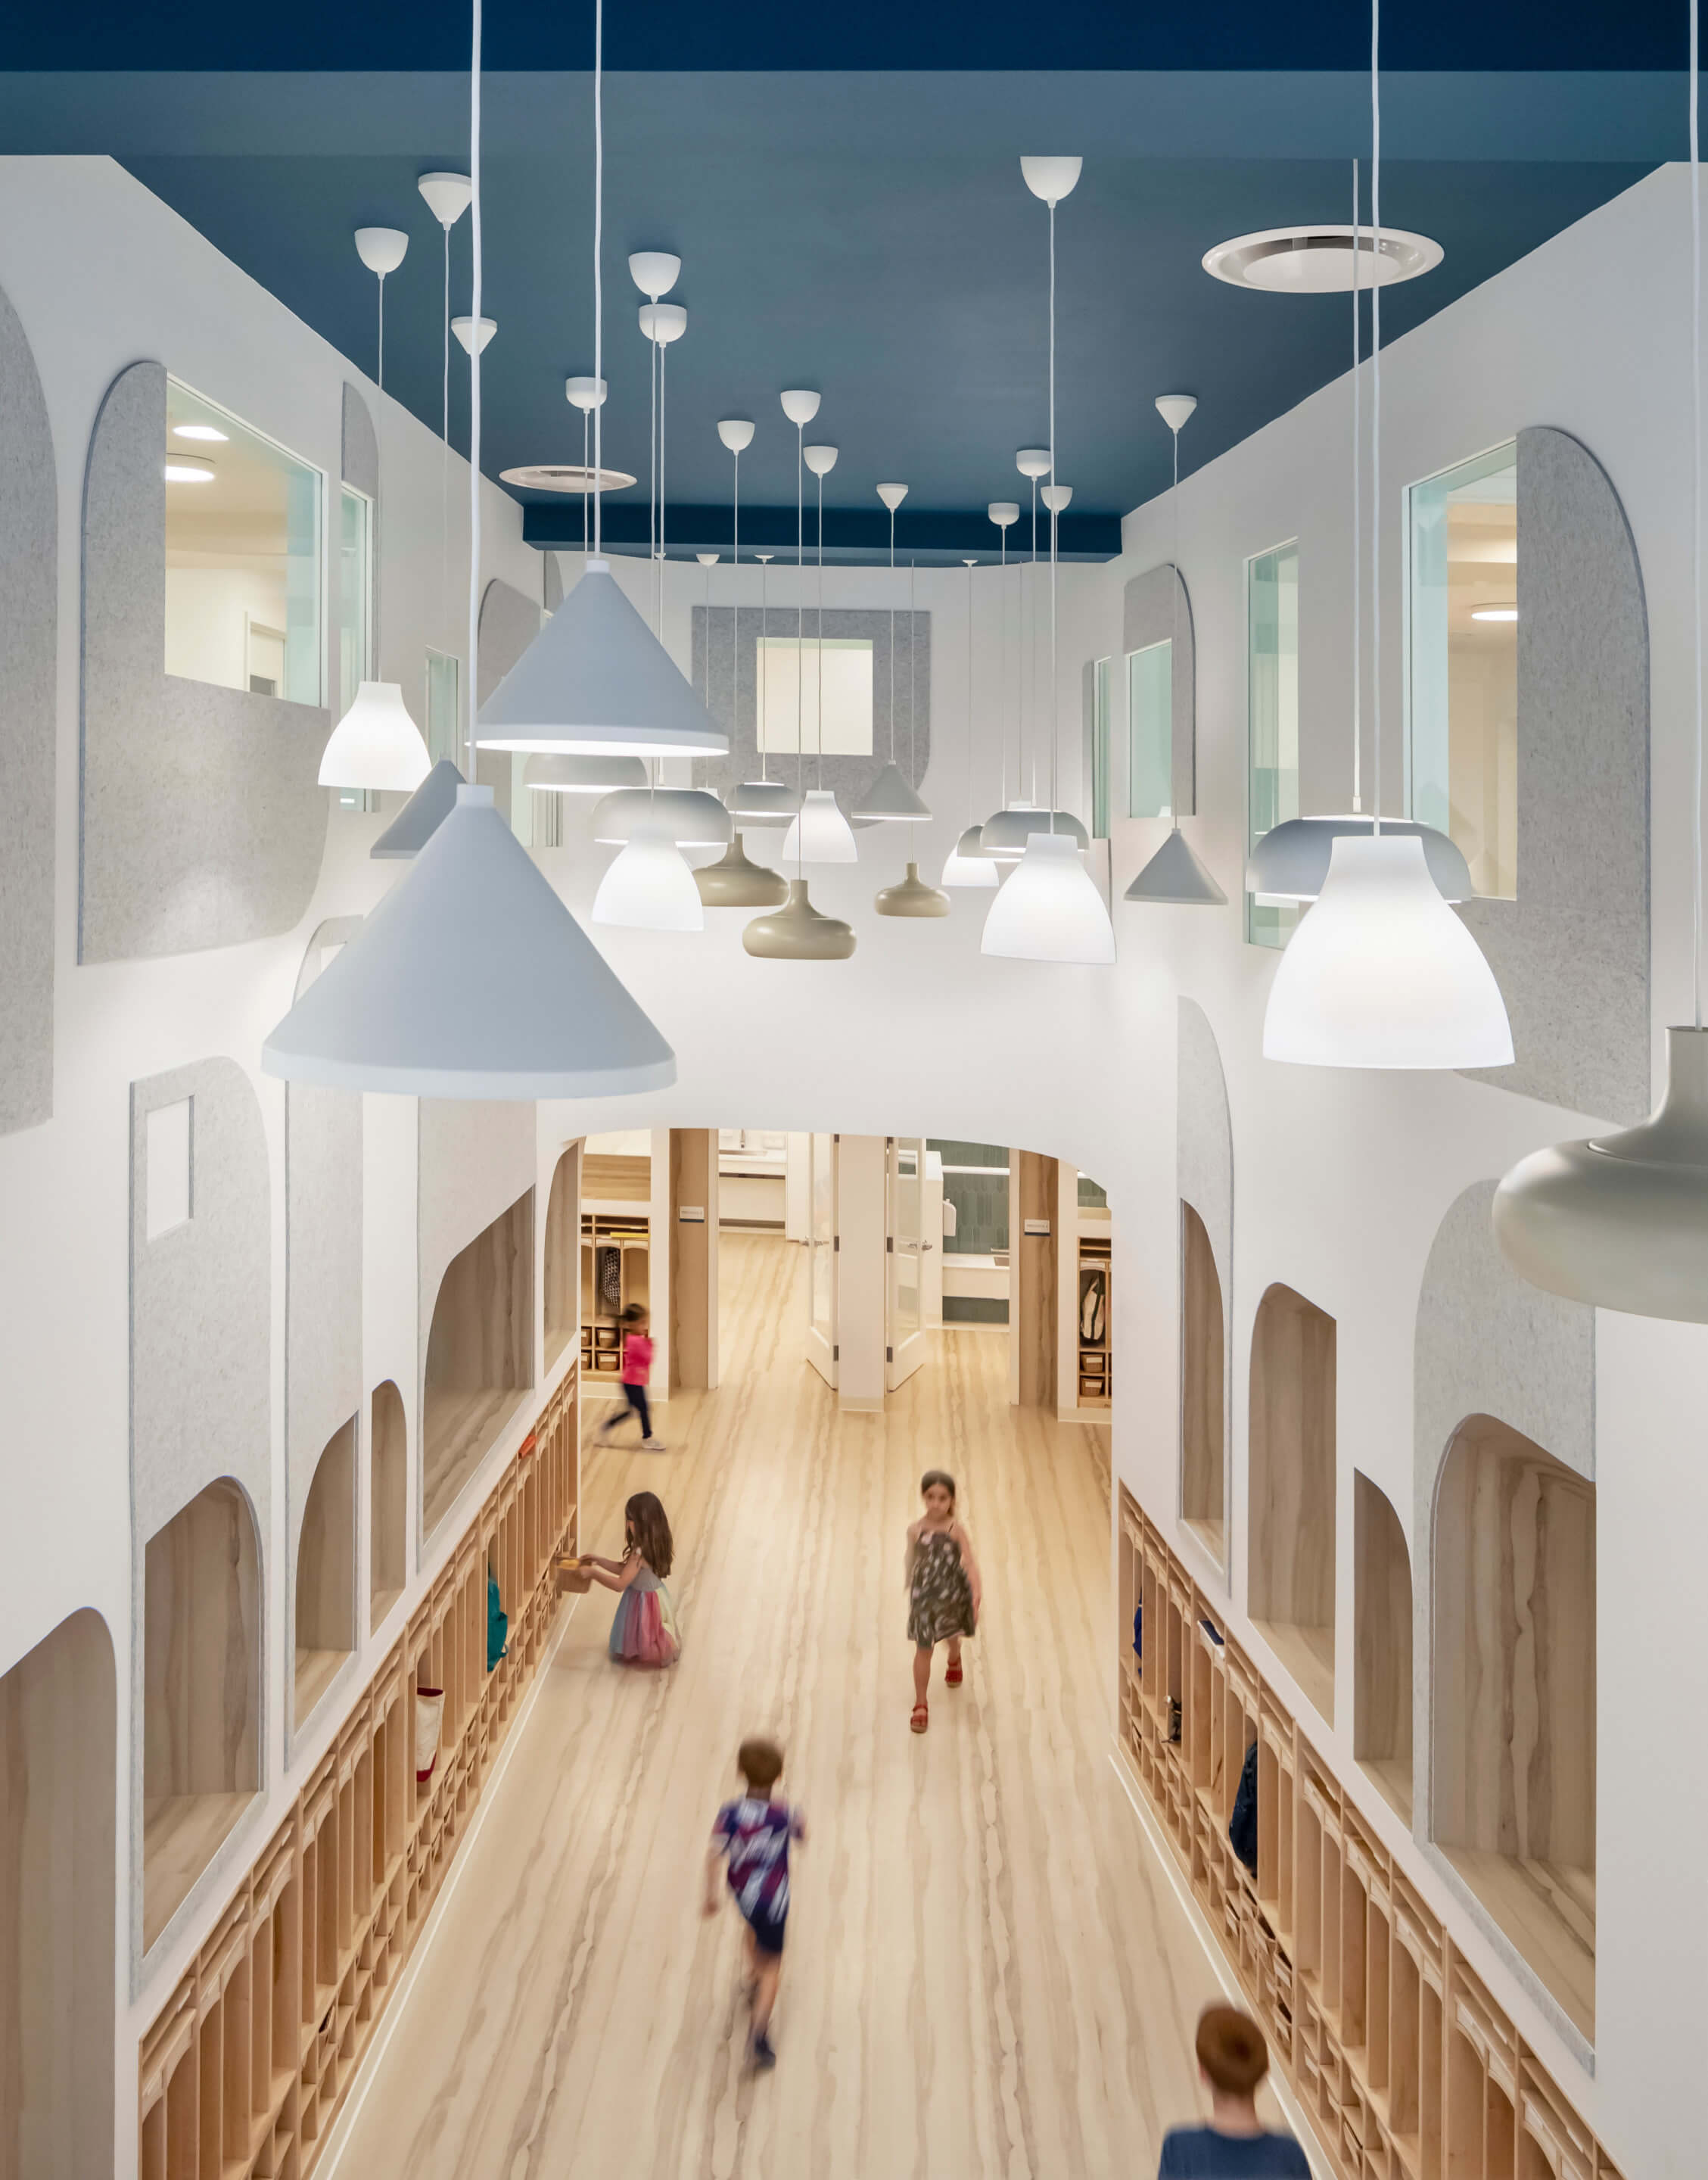 A preschool, the City Kids Education Center, with a double height central atrium